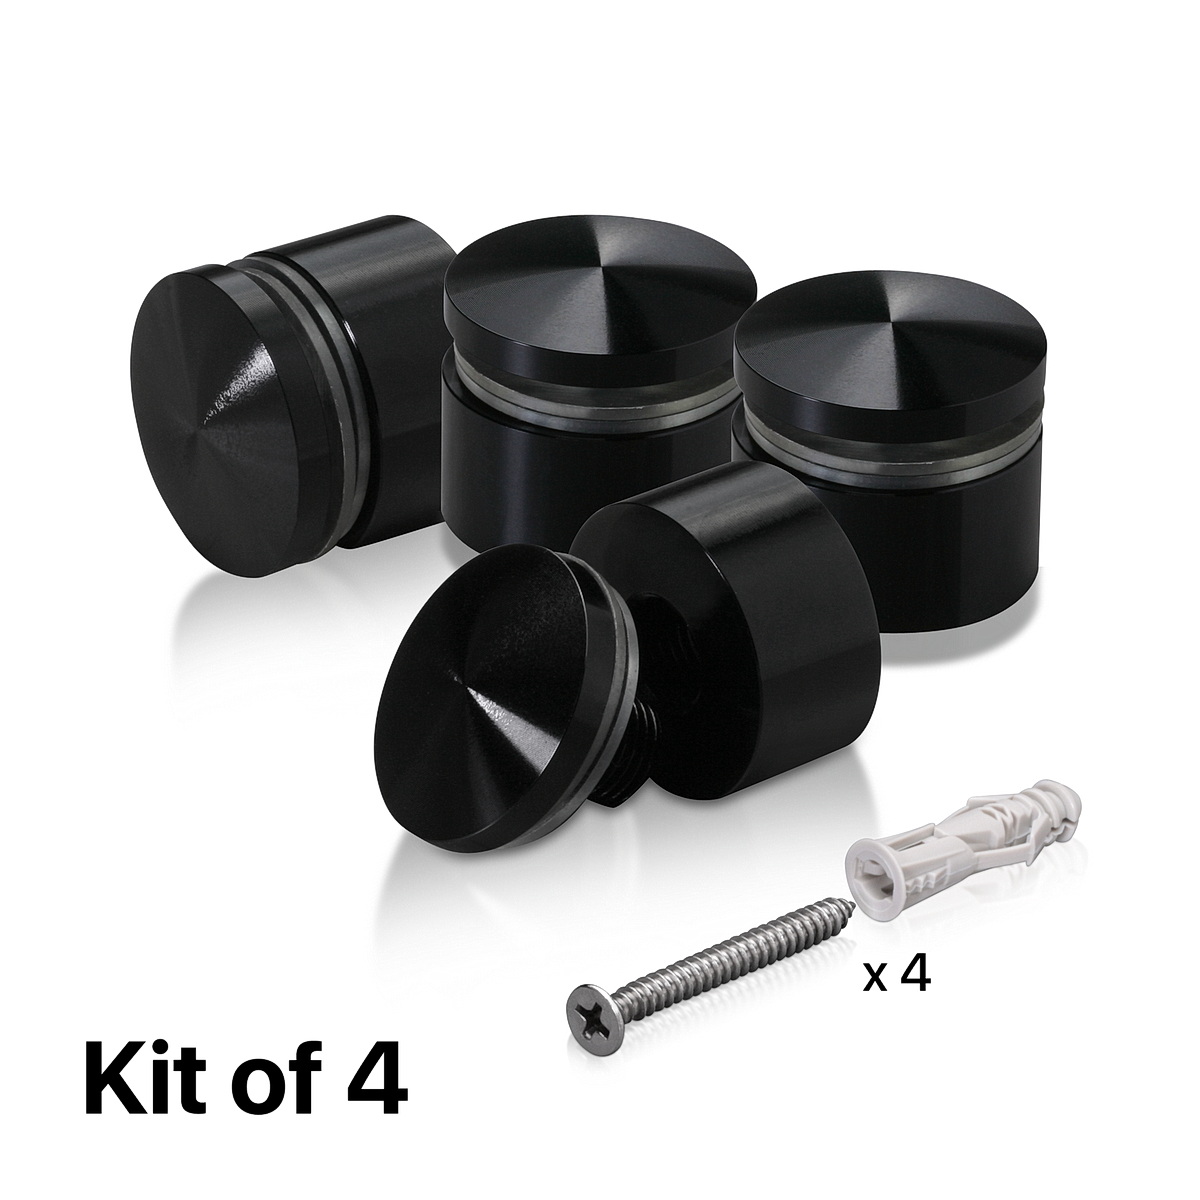 (Set of 4) 1'' Diameter X 1/2'' Barrel Length, Aluminum Rounded Head Standoffs, Black Anodized Finish Standoff with (4) 2216Z Screws and (4) LANC1 Anchors for concrete or drywall (For Inside / Outside use) [Required Material Hole Size: 7/16'']